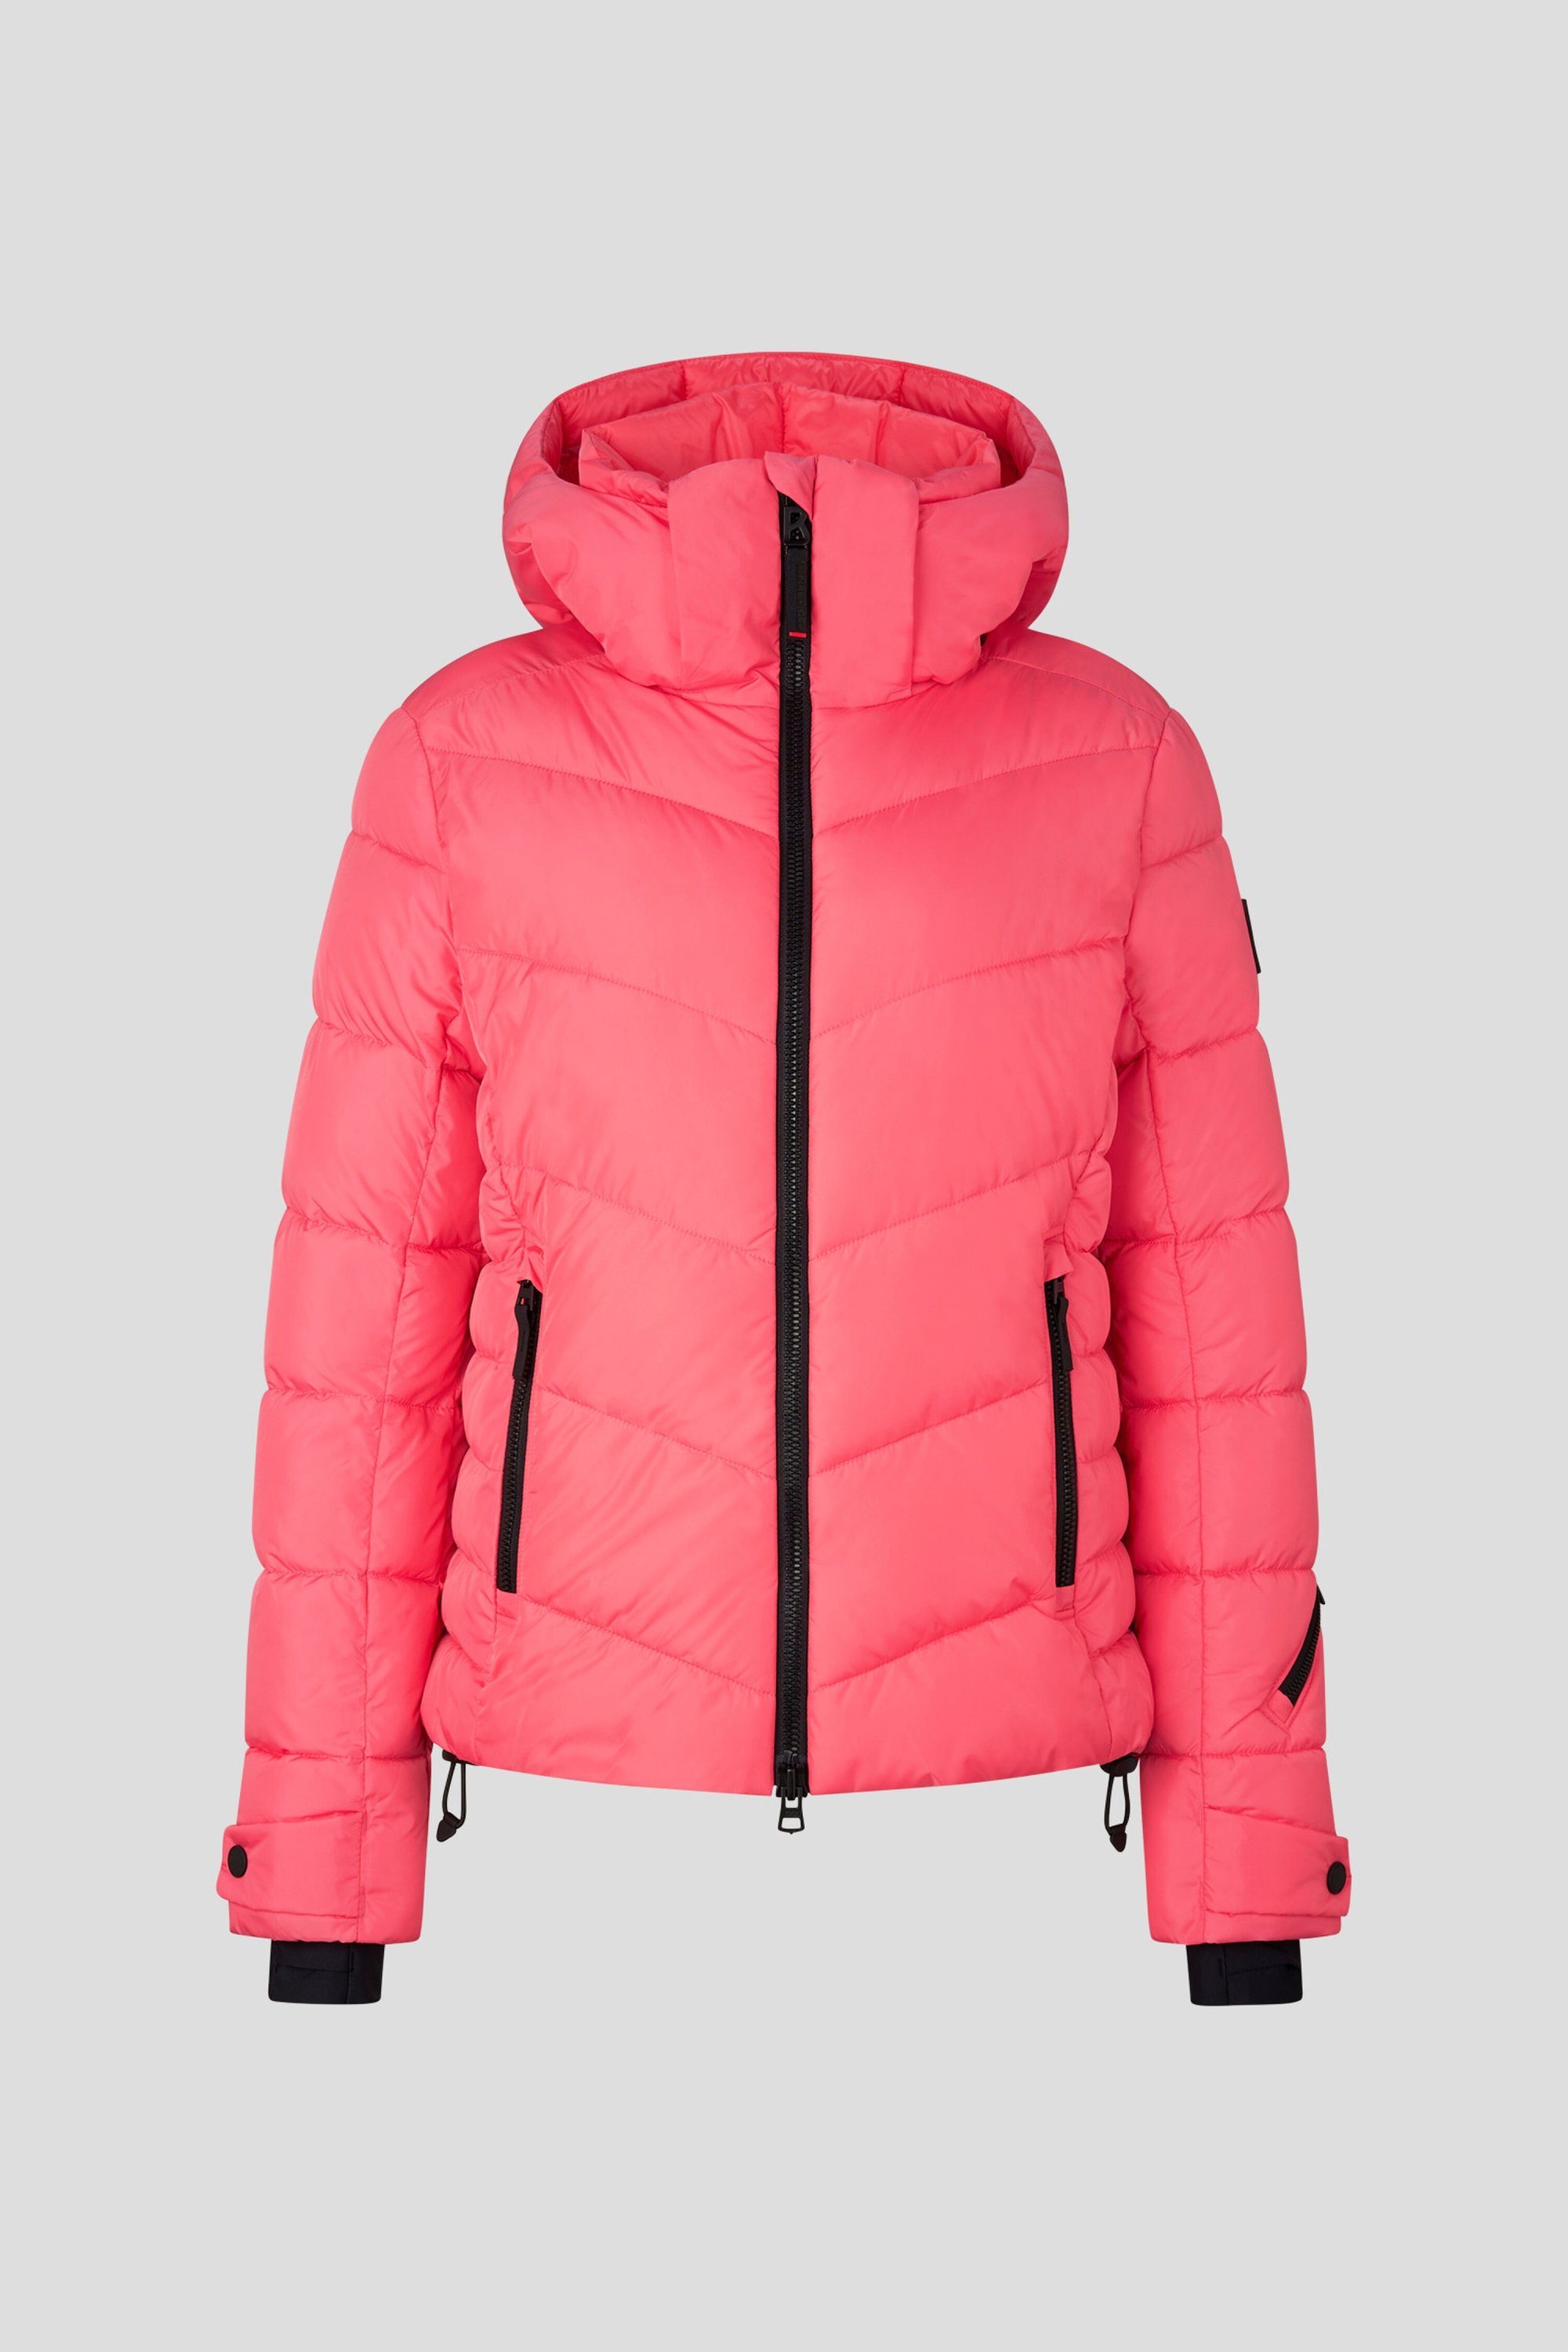 coral Ice pink SAELLY2 Fire Bogner + Kapuzensweatjacke